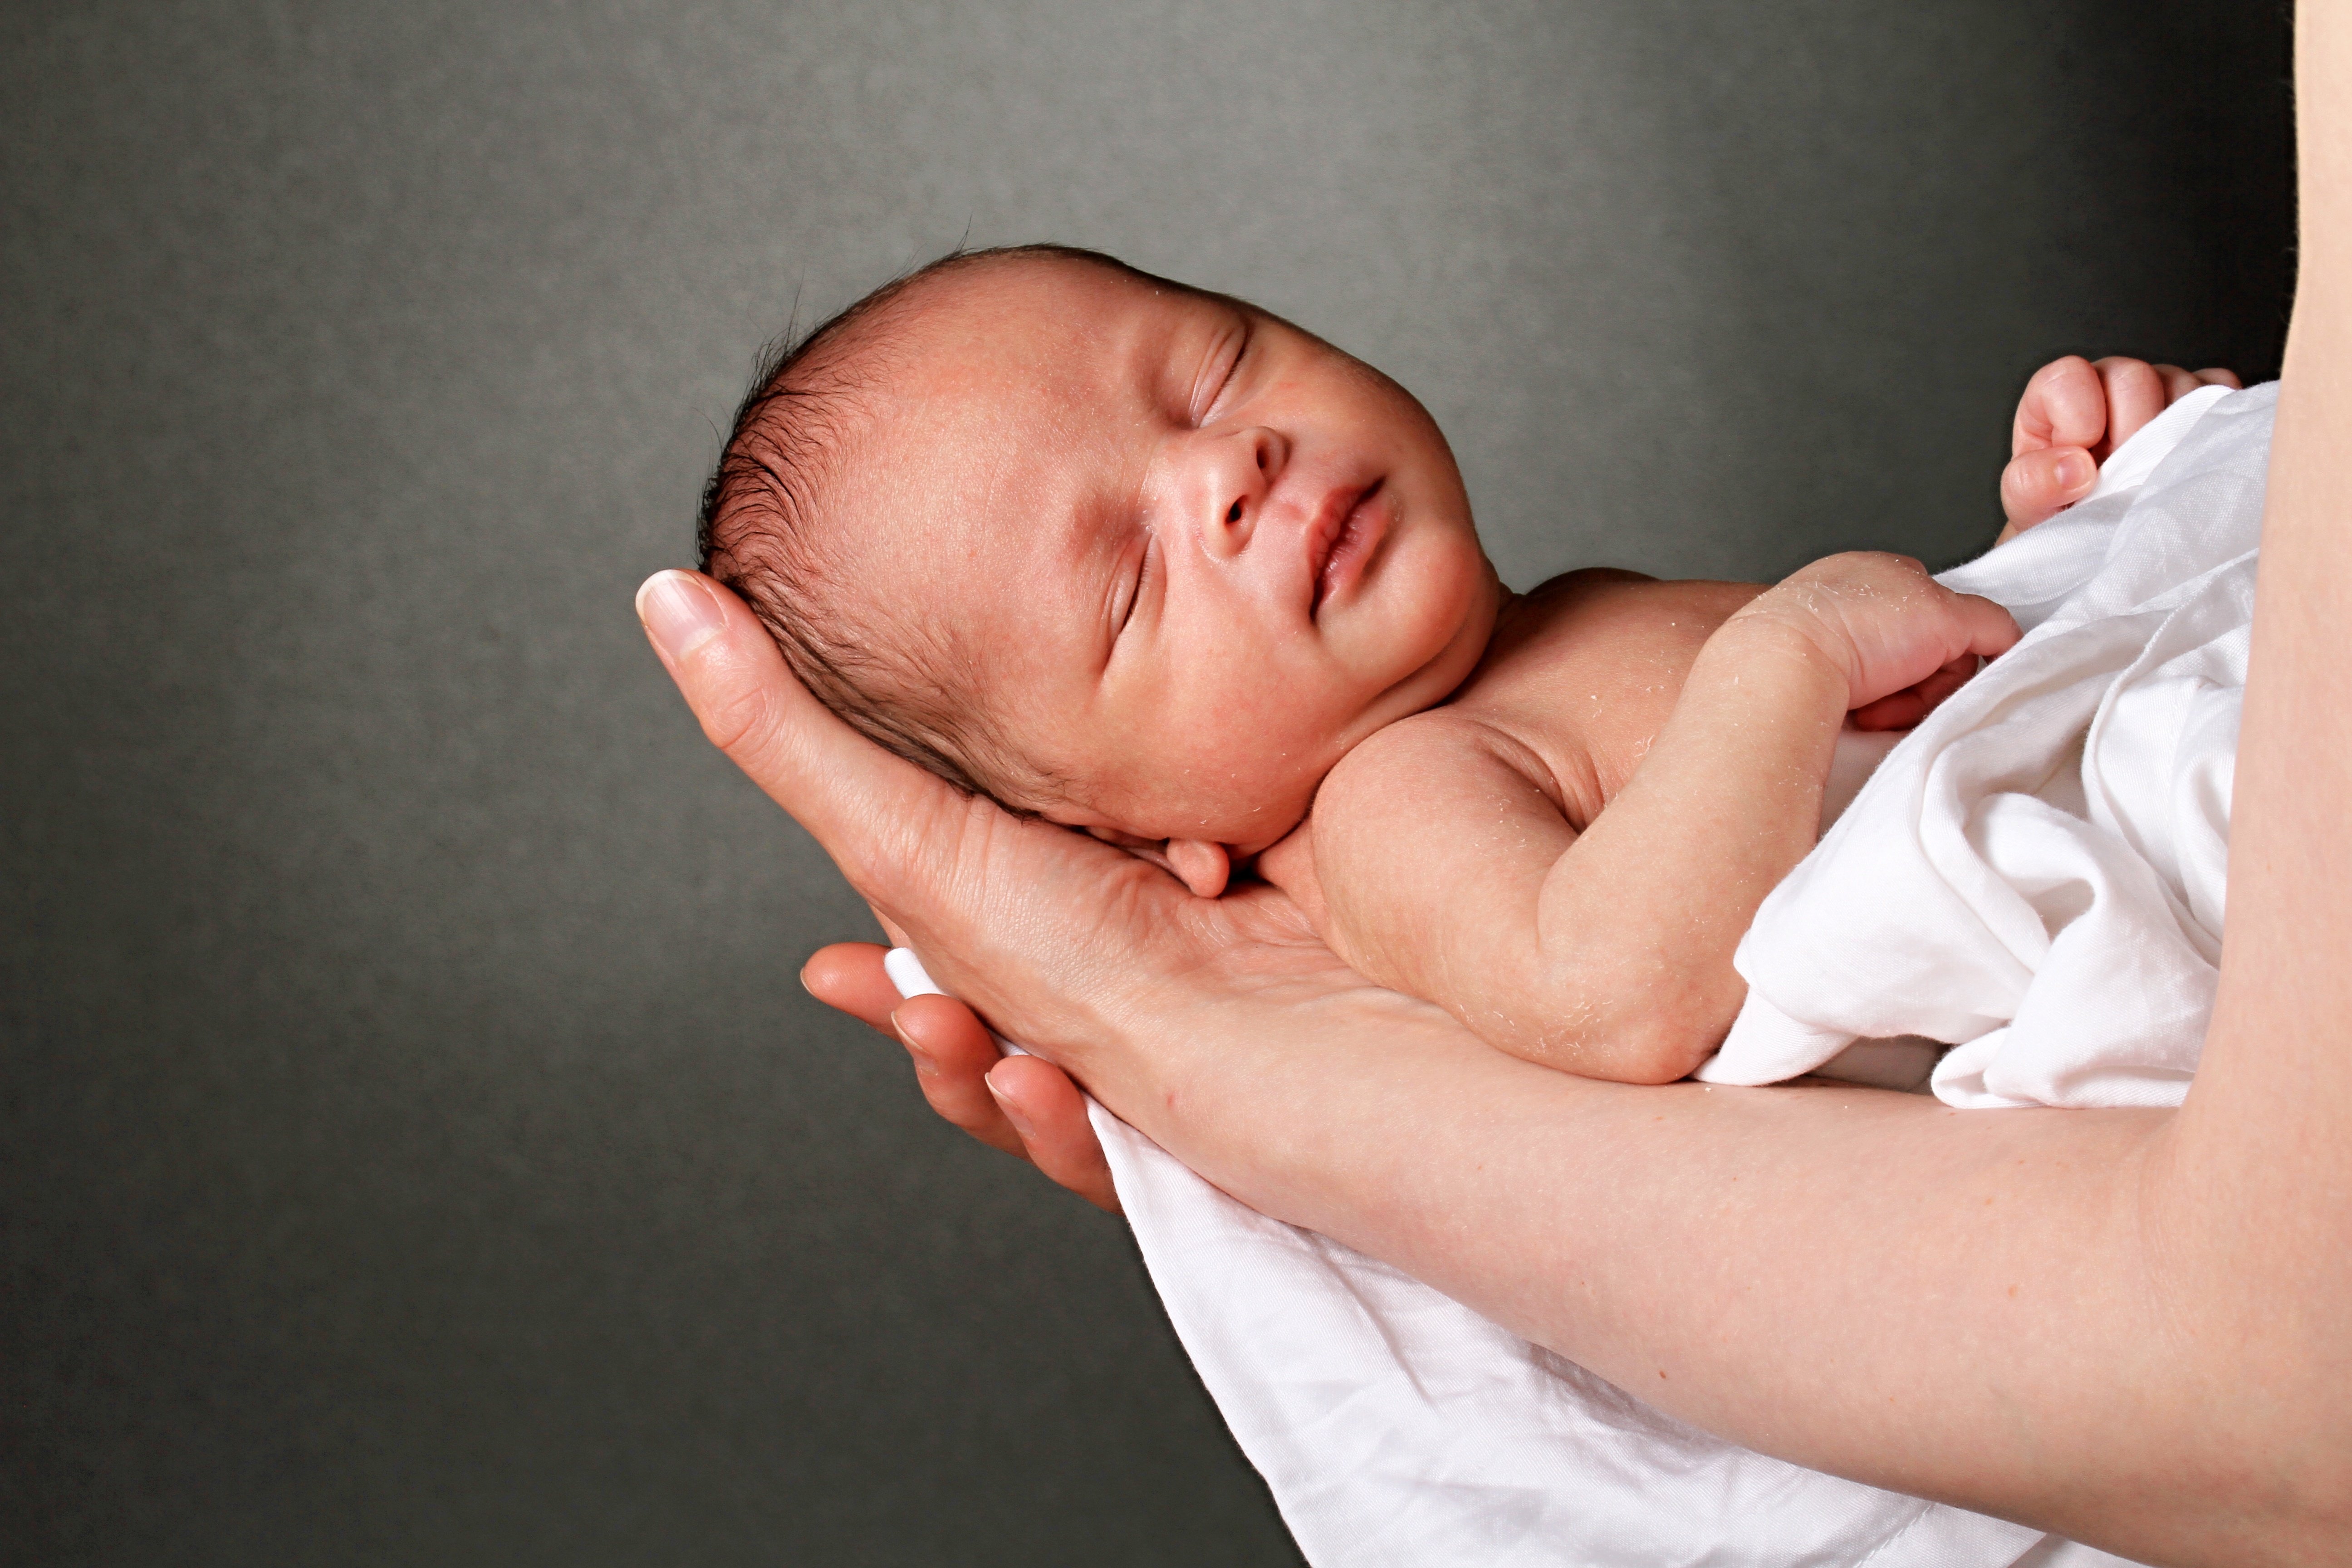 A new born baby in mother's Arms | Image: Shutterstock